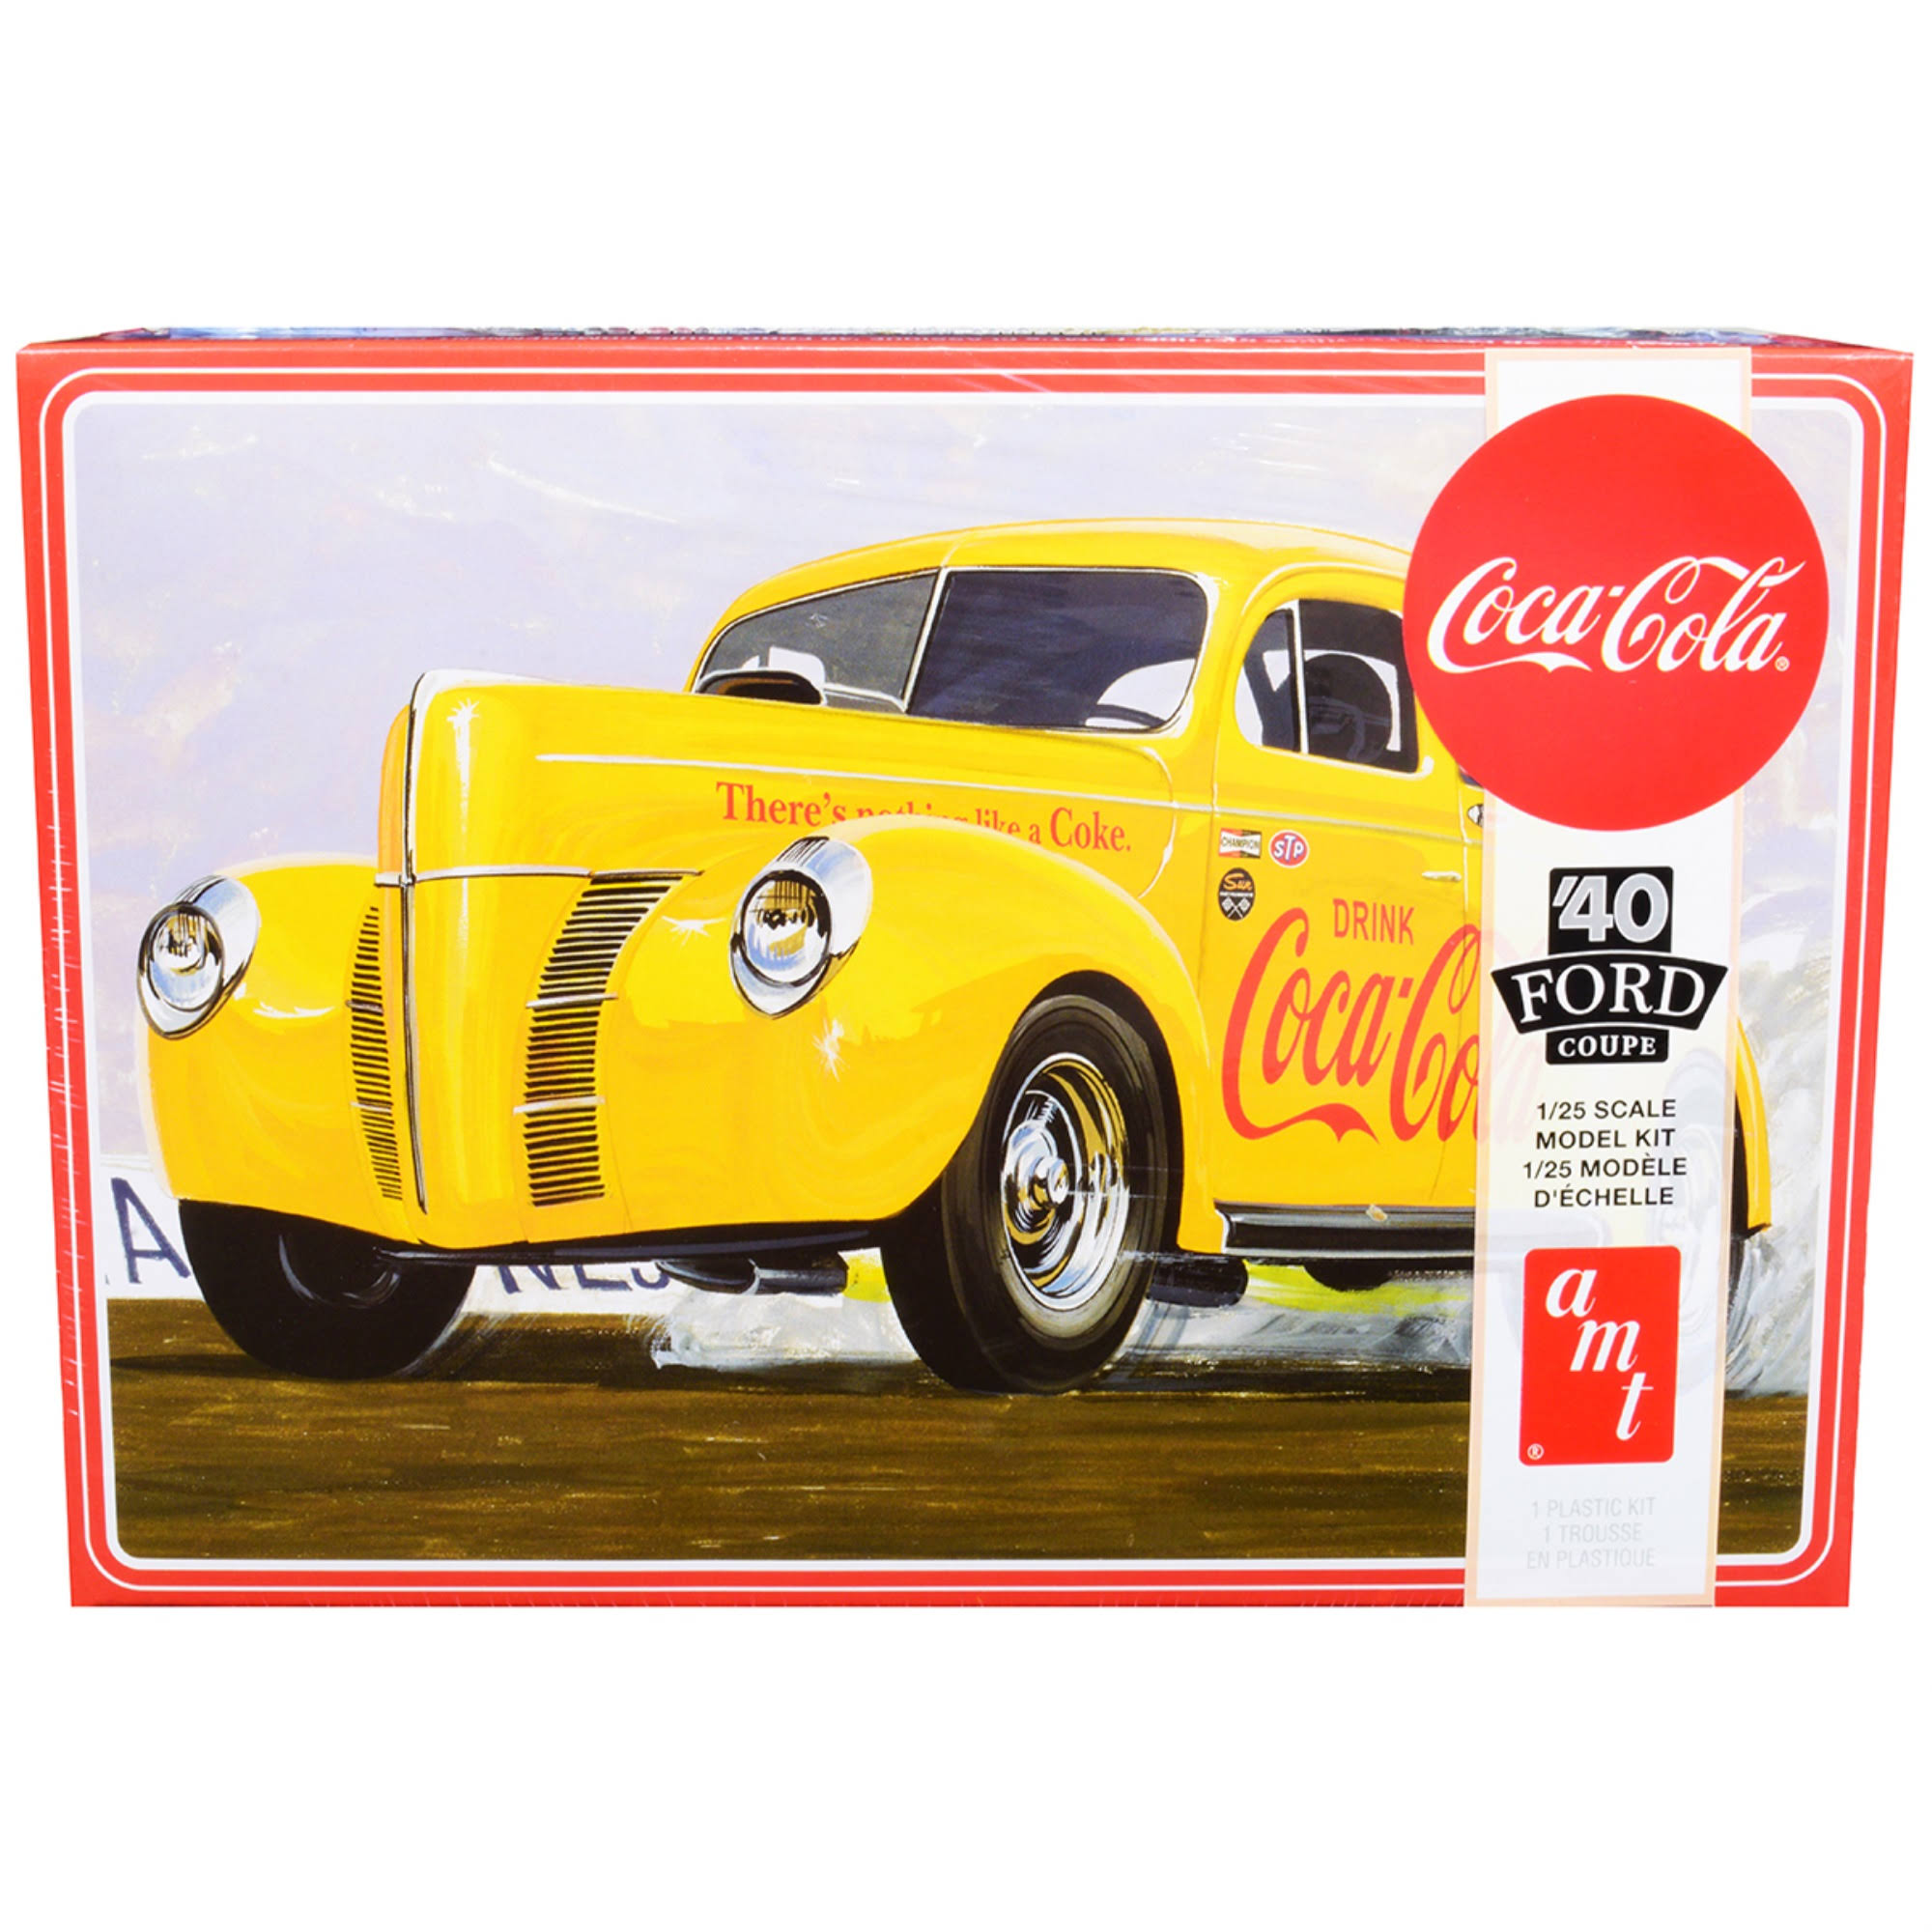 AMT 1/25 1940 Ford Coupe Coca-Cola Scale Model Kit